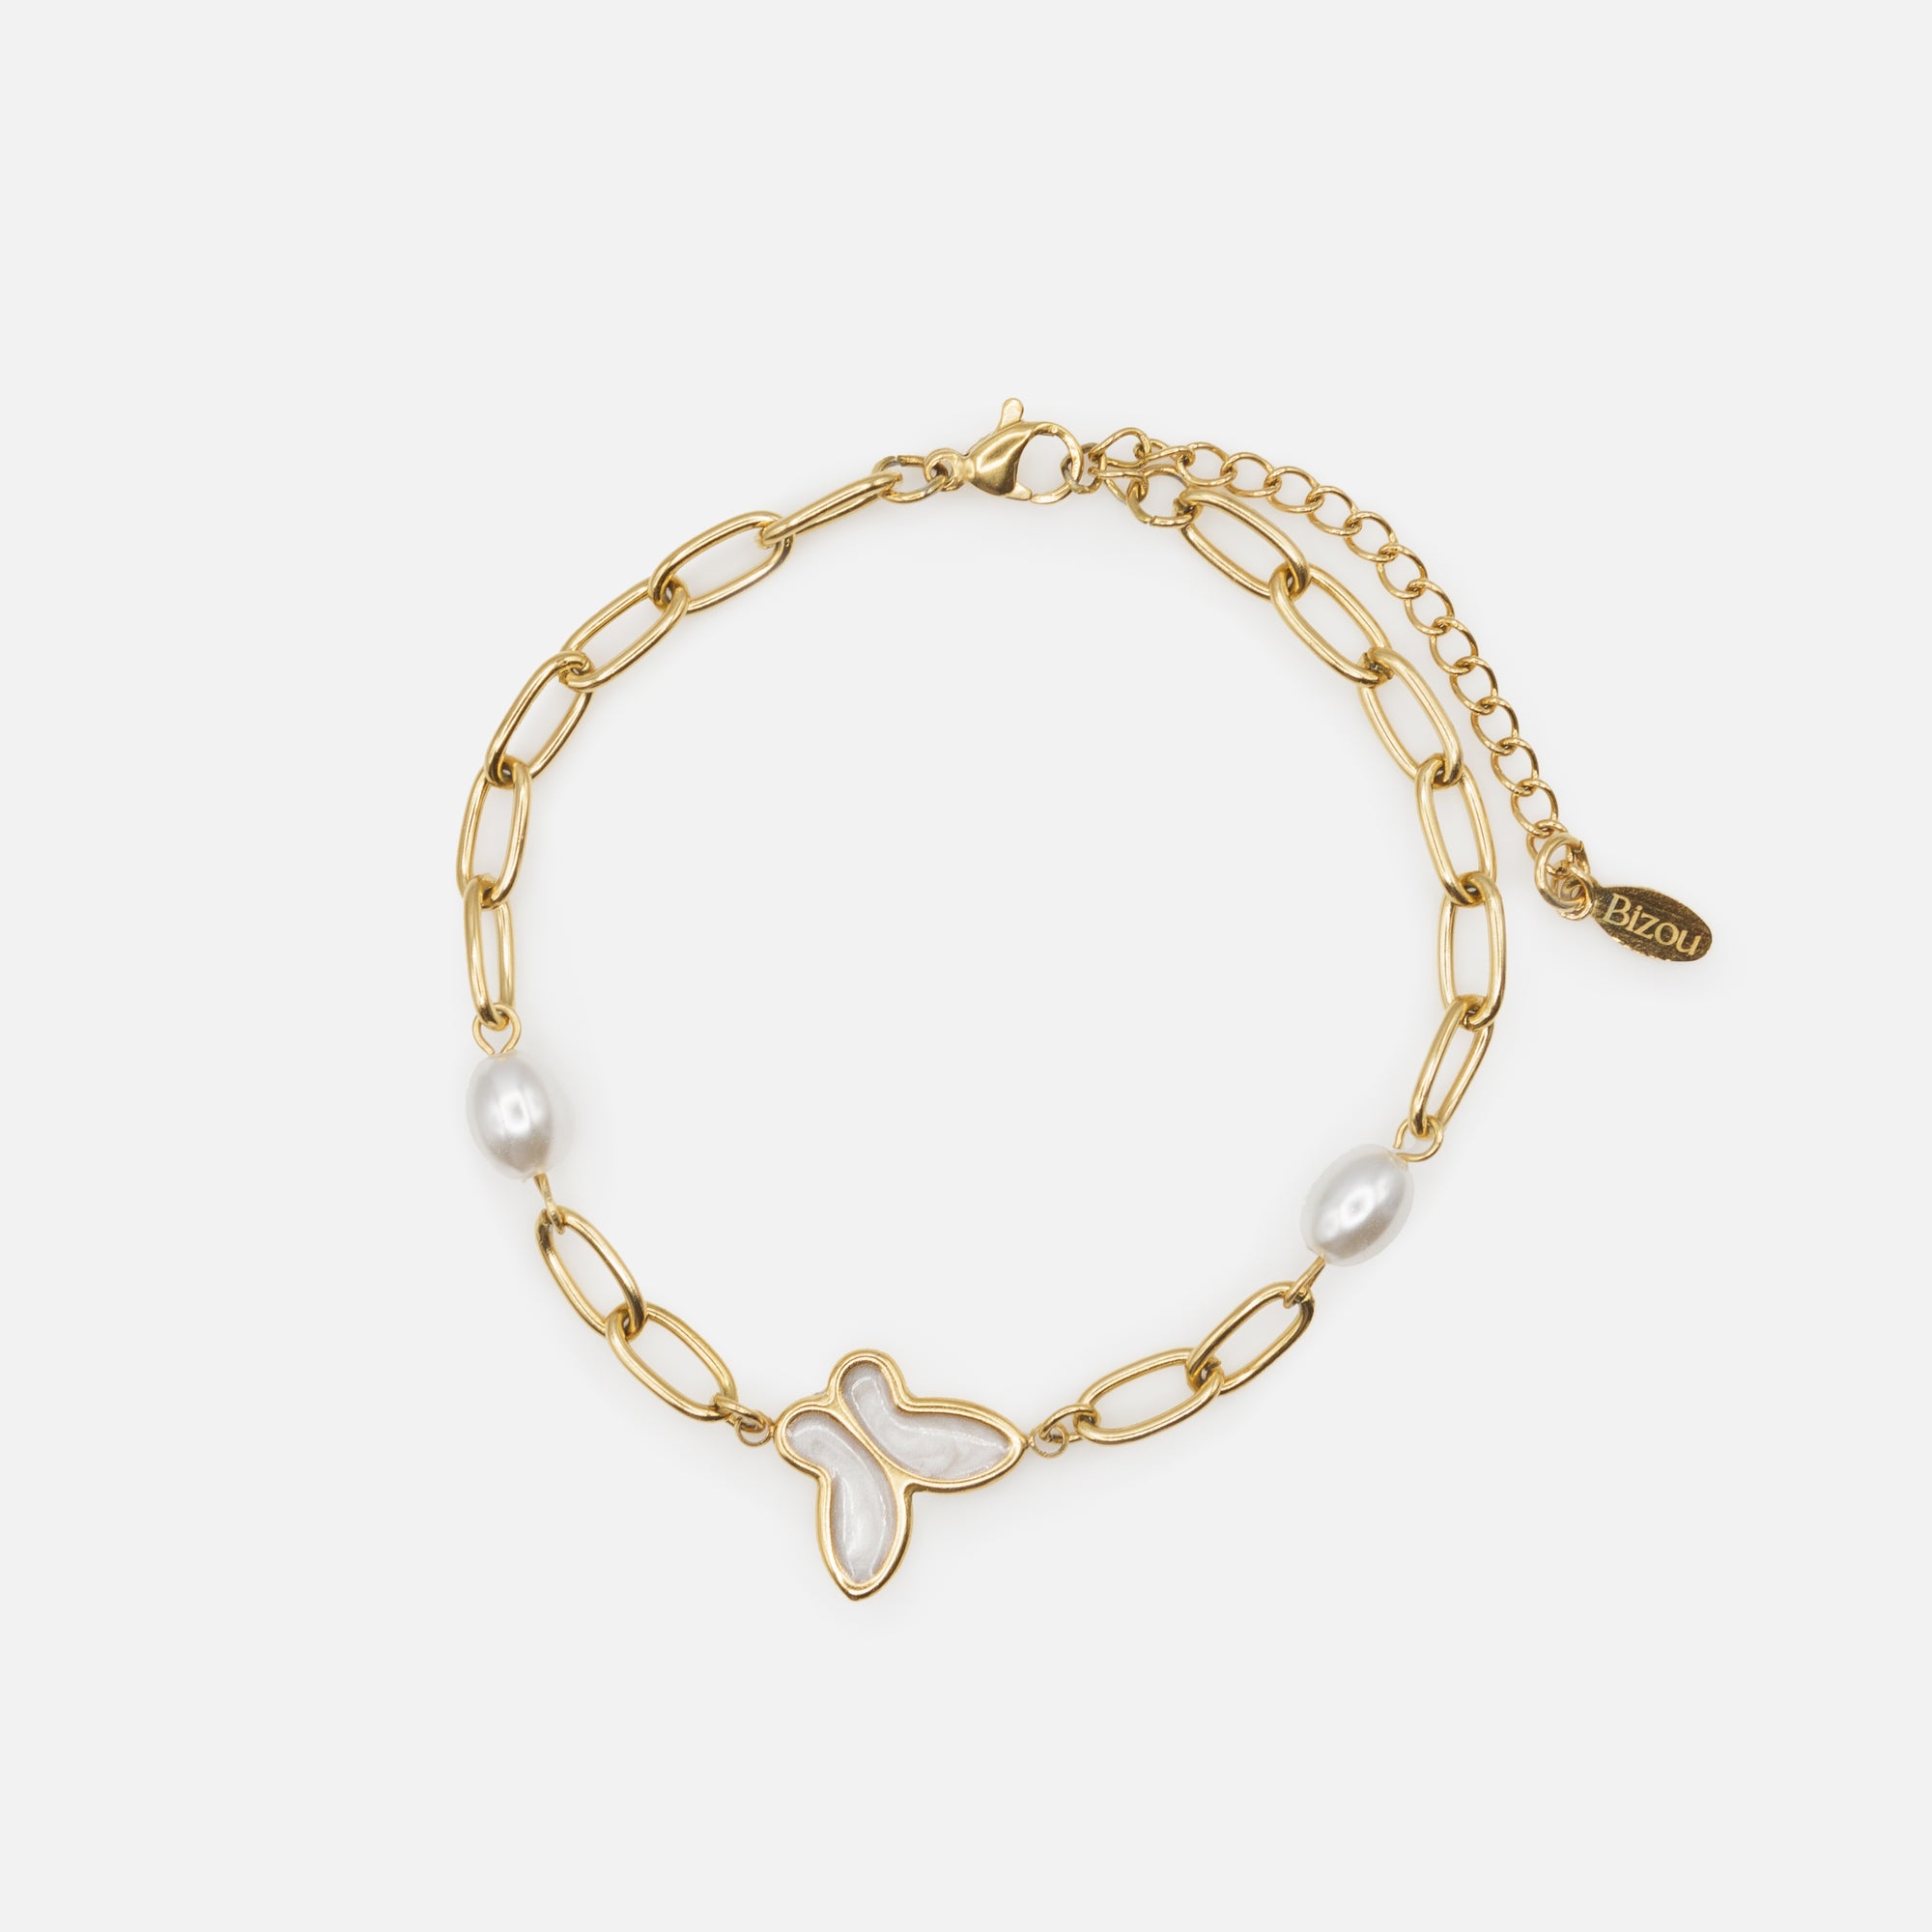 Golden bracelet with elongated pearls and pearly butterfly in stainless steel